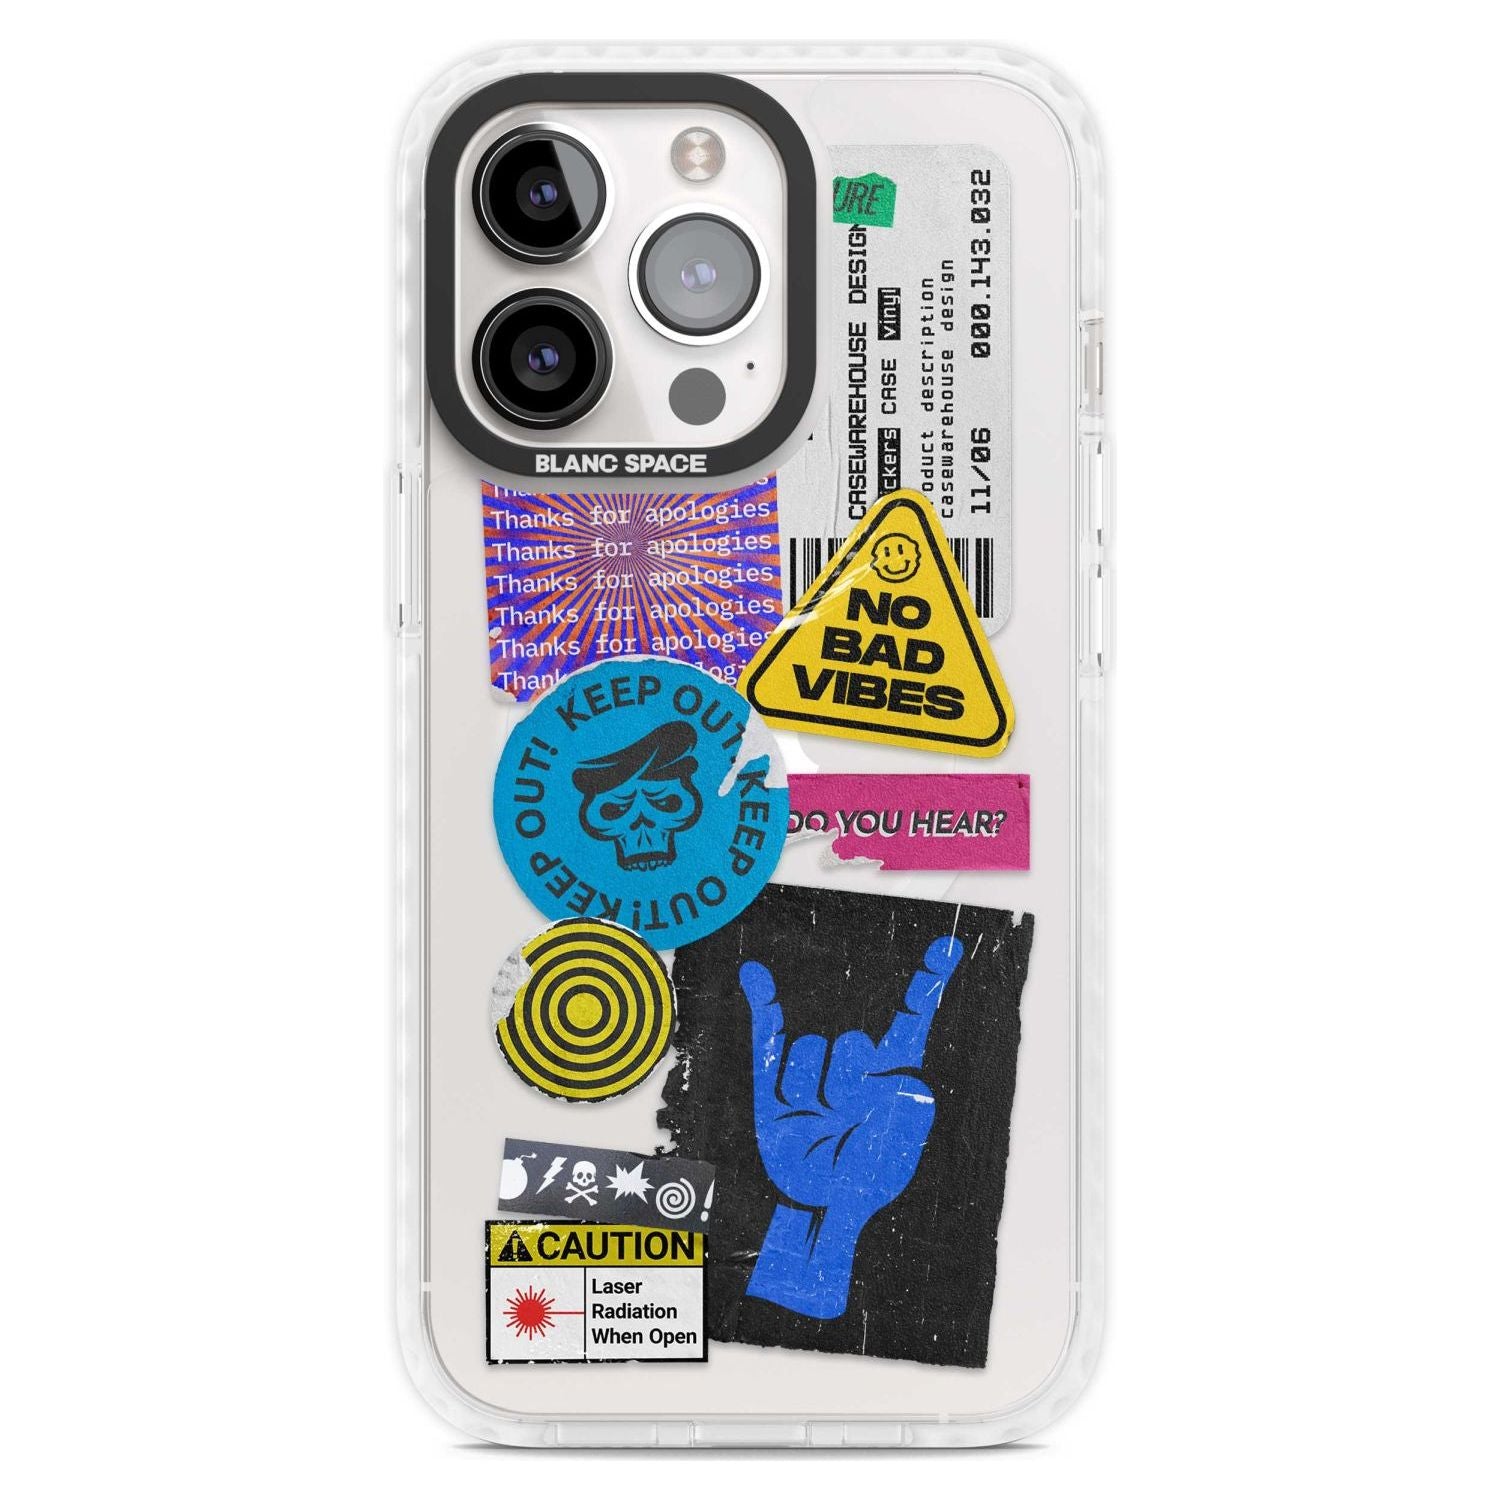 No Bad Vibes Sticker Mix Phone Case iPhone 15 Pro Max / Magsafe Impact Case,iPhone 15 Pro / Magsafe Impact Case Blanc Space